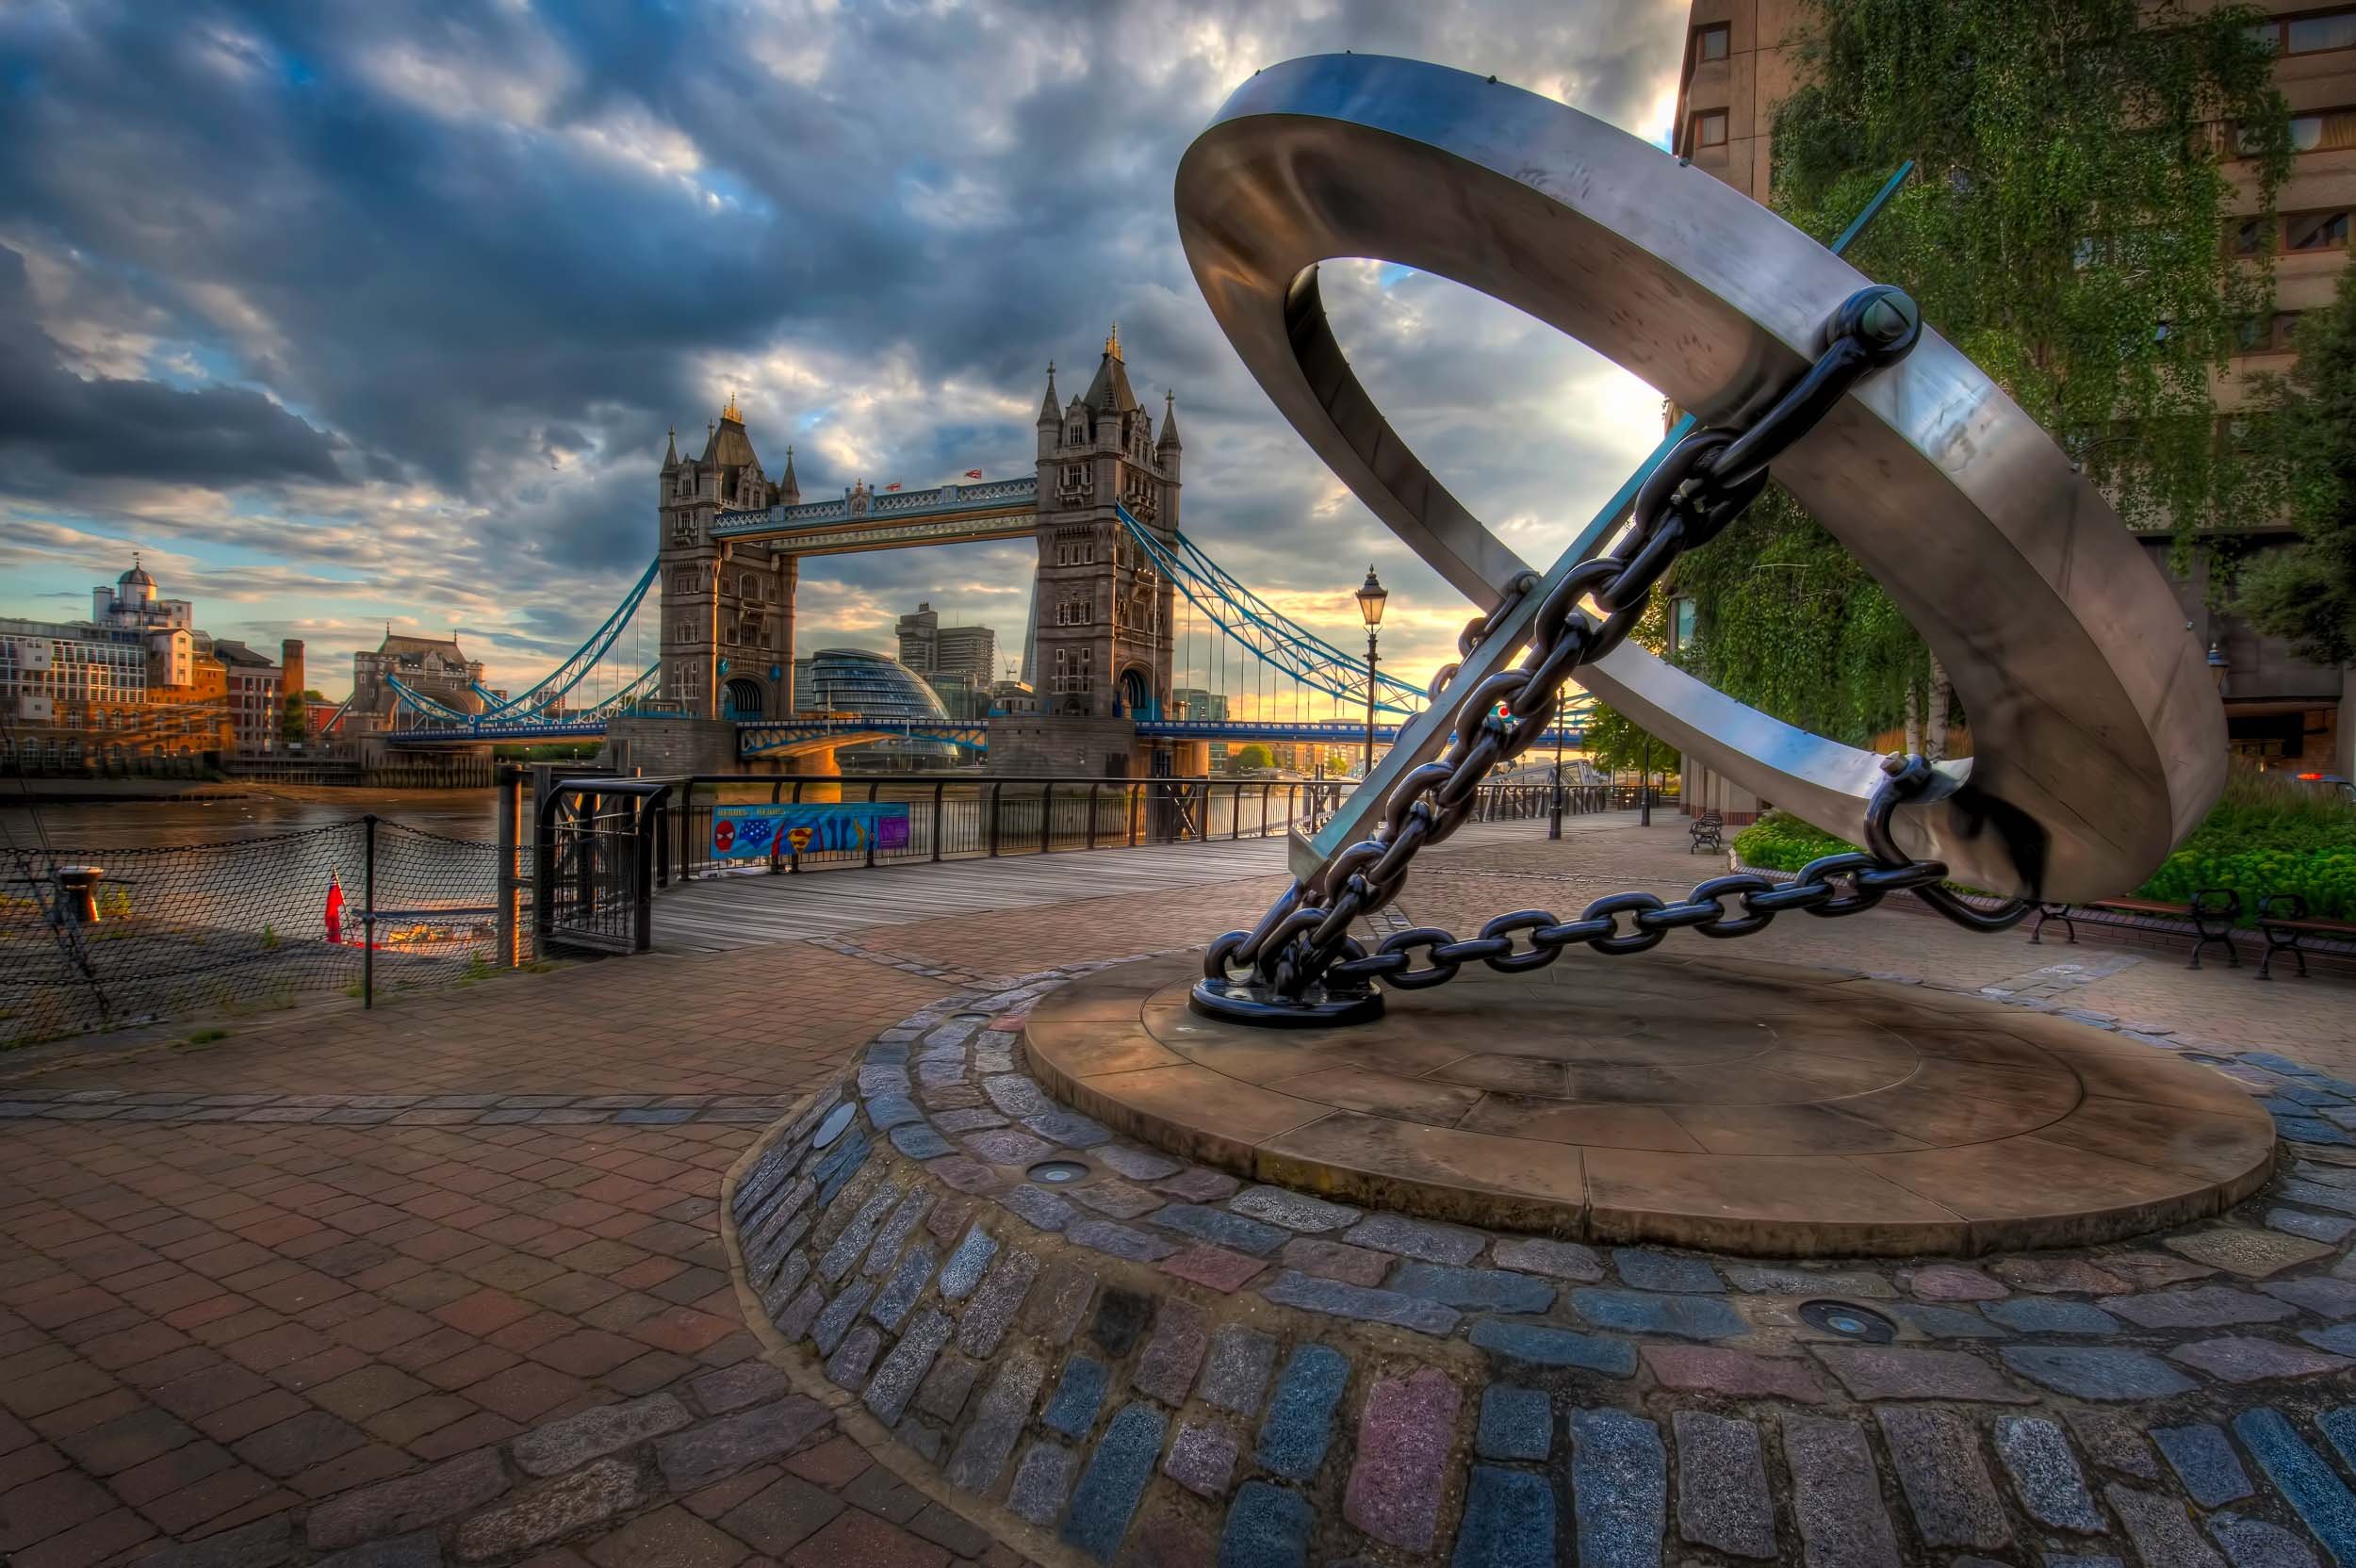 A different perspective - Tower Bridge in London.jpg